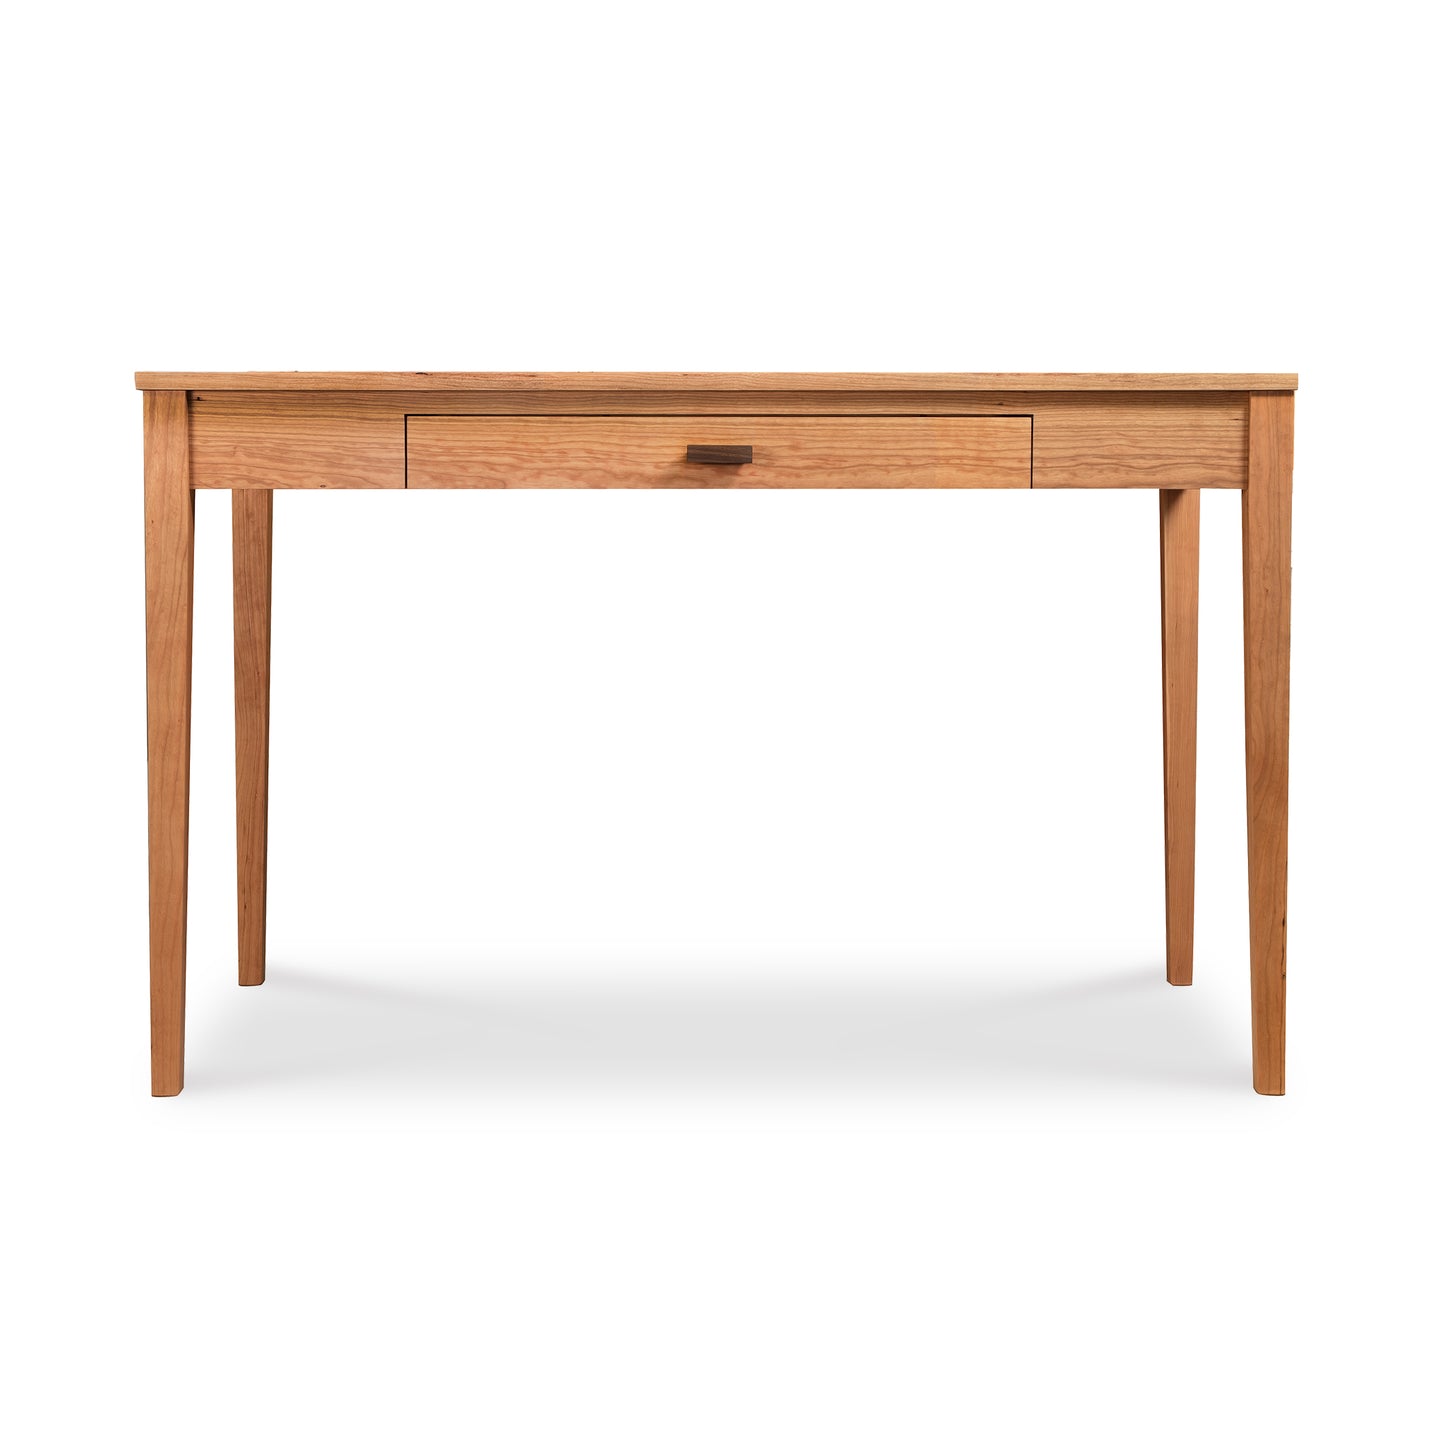 Maple Corner Woodworks Andover Modern Writing Desk, a solid wood writing desk with a single central drawer, standing on four legs, isolated against a white background.